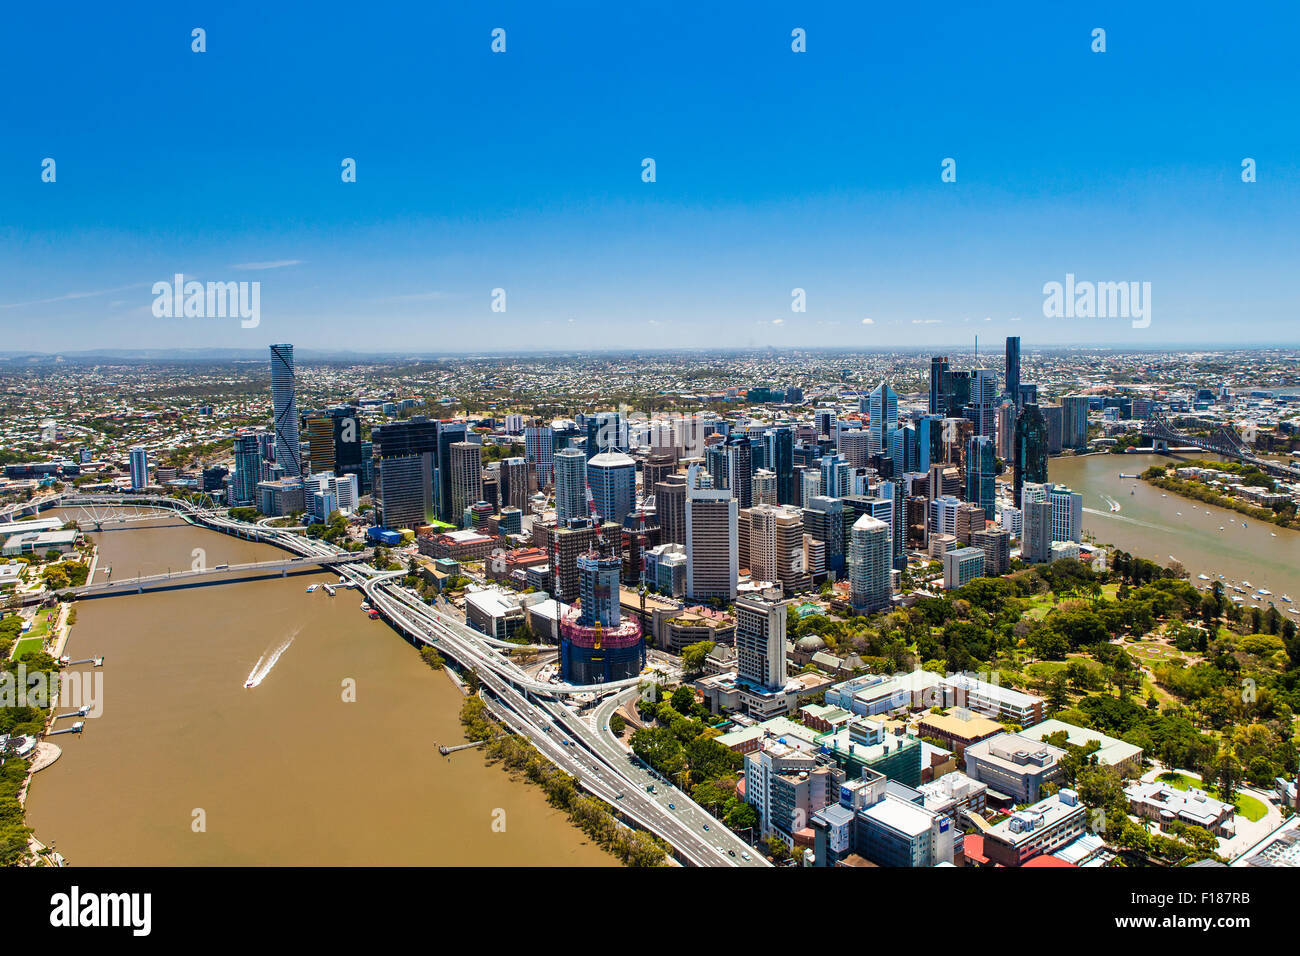 BRISBANE, AUSTRALIA - NOVEMBER 11 2014: View of Brisbane from air over the river. Brisbane is the capital of QLD and the third l Stock Photo